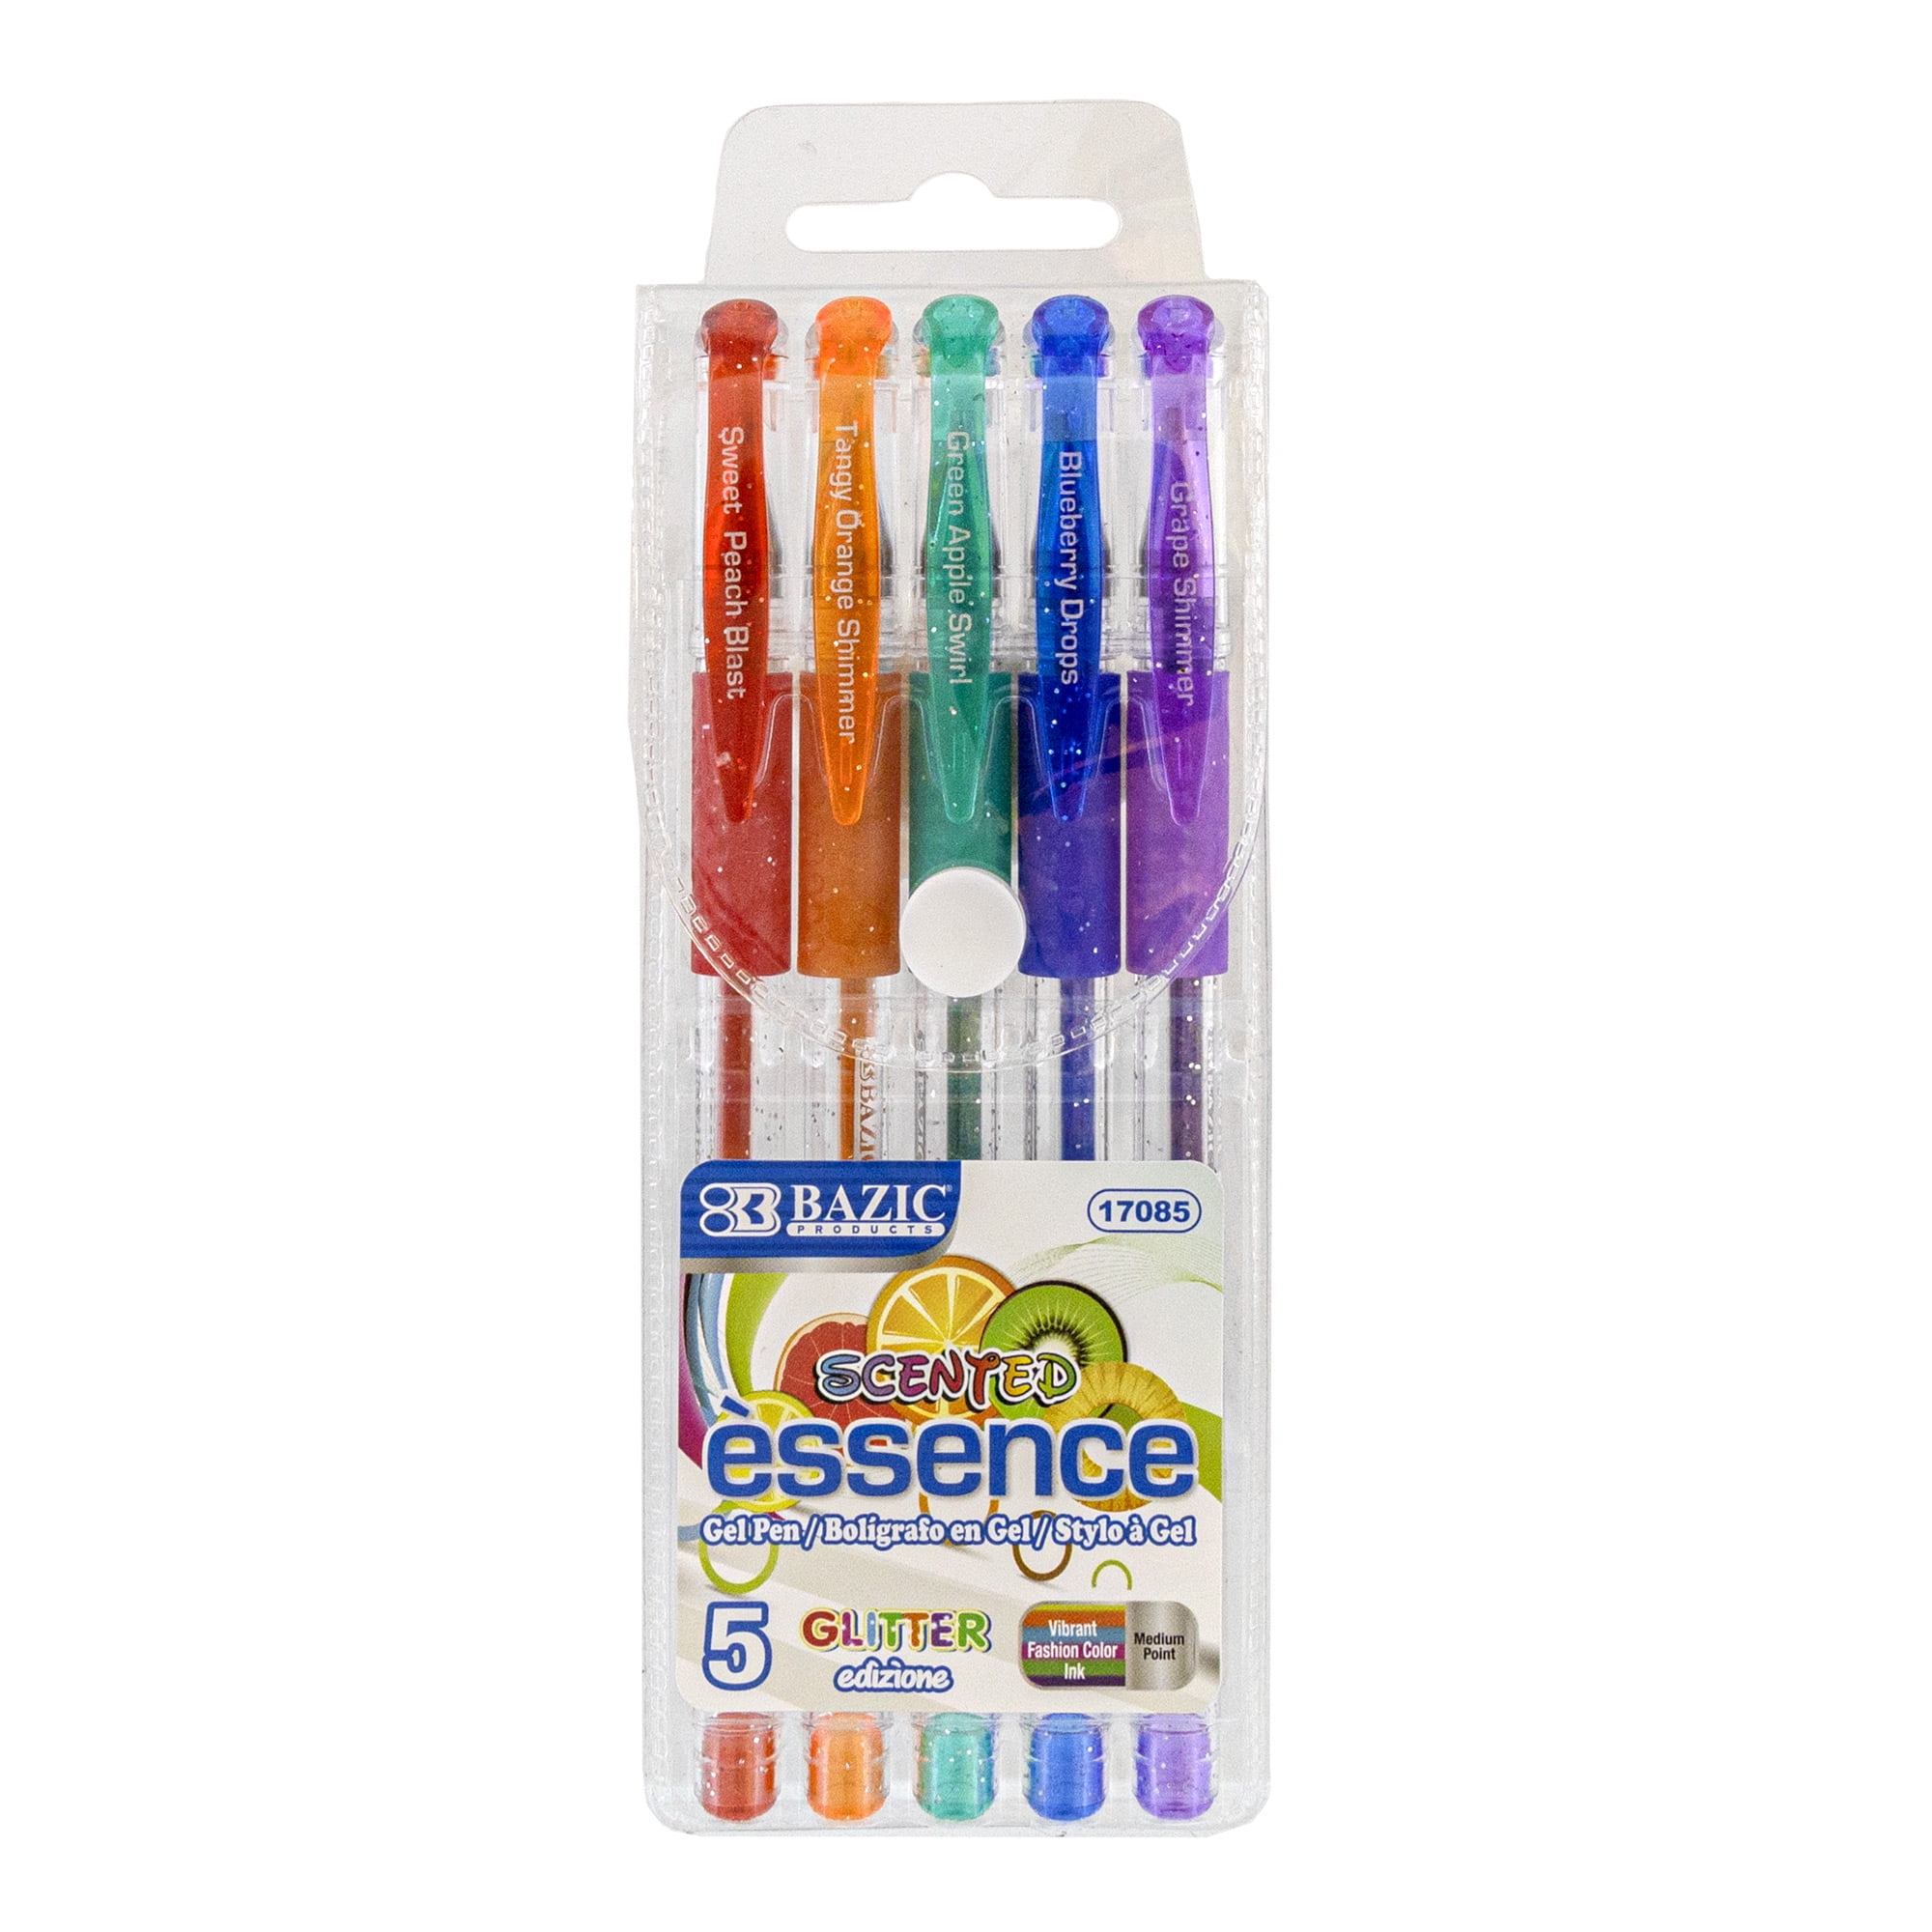 Picture of Bazic Products 17085 Scented Glitter Color Essence Gel Pen with Cushion Grip - Pack of 5